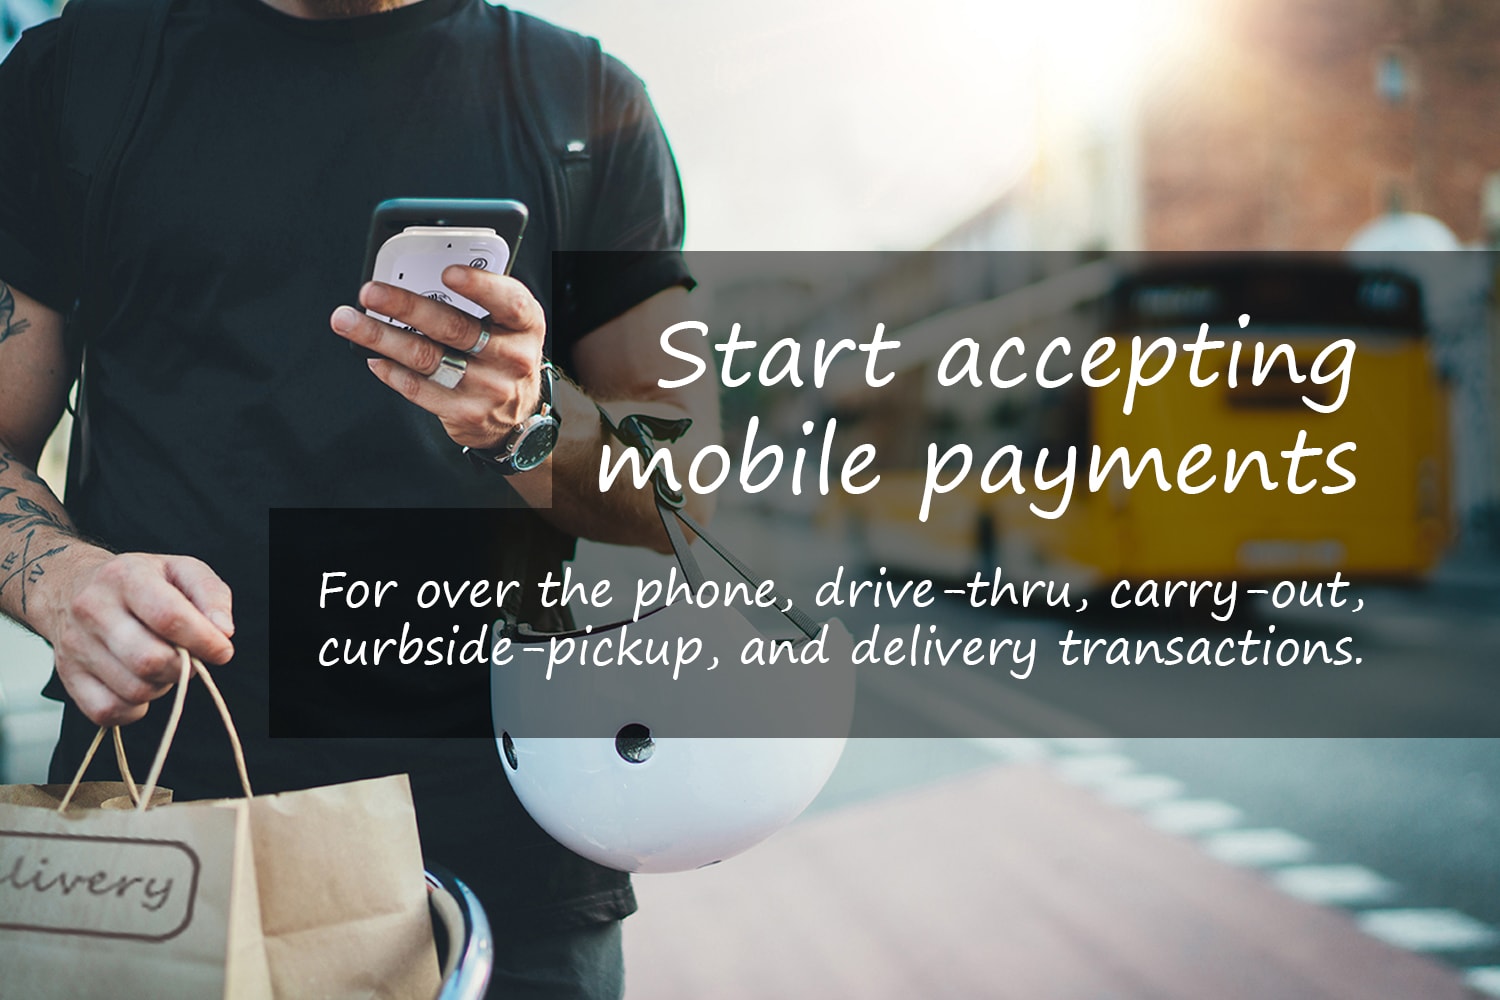 Start accepting mobile payments for For over the phone, drive-thru, carry-out,
curbside-pickup, and delivery transactions.